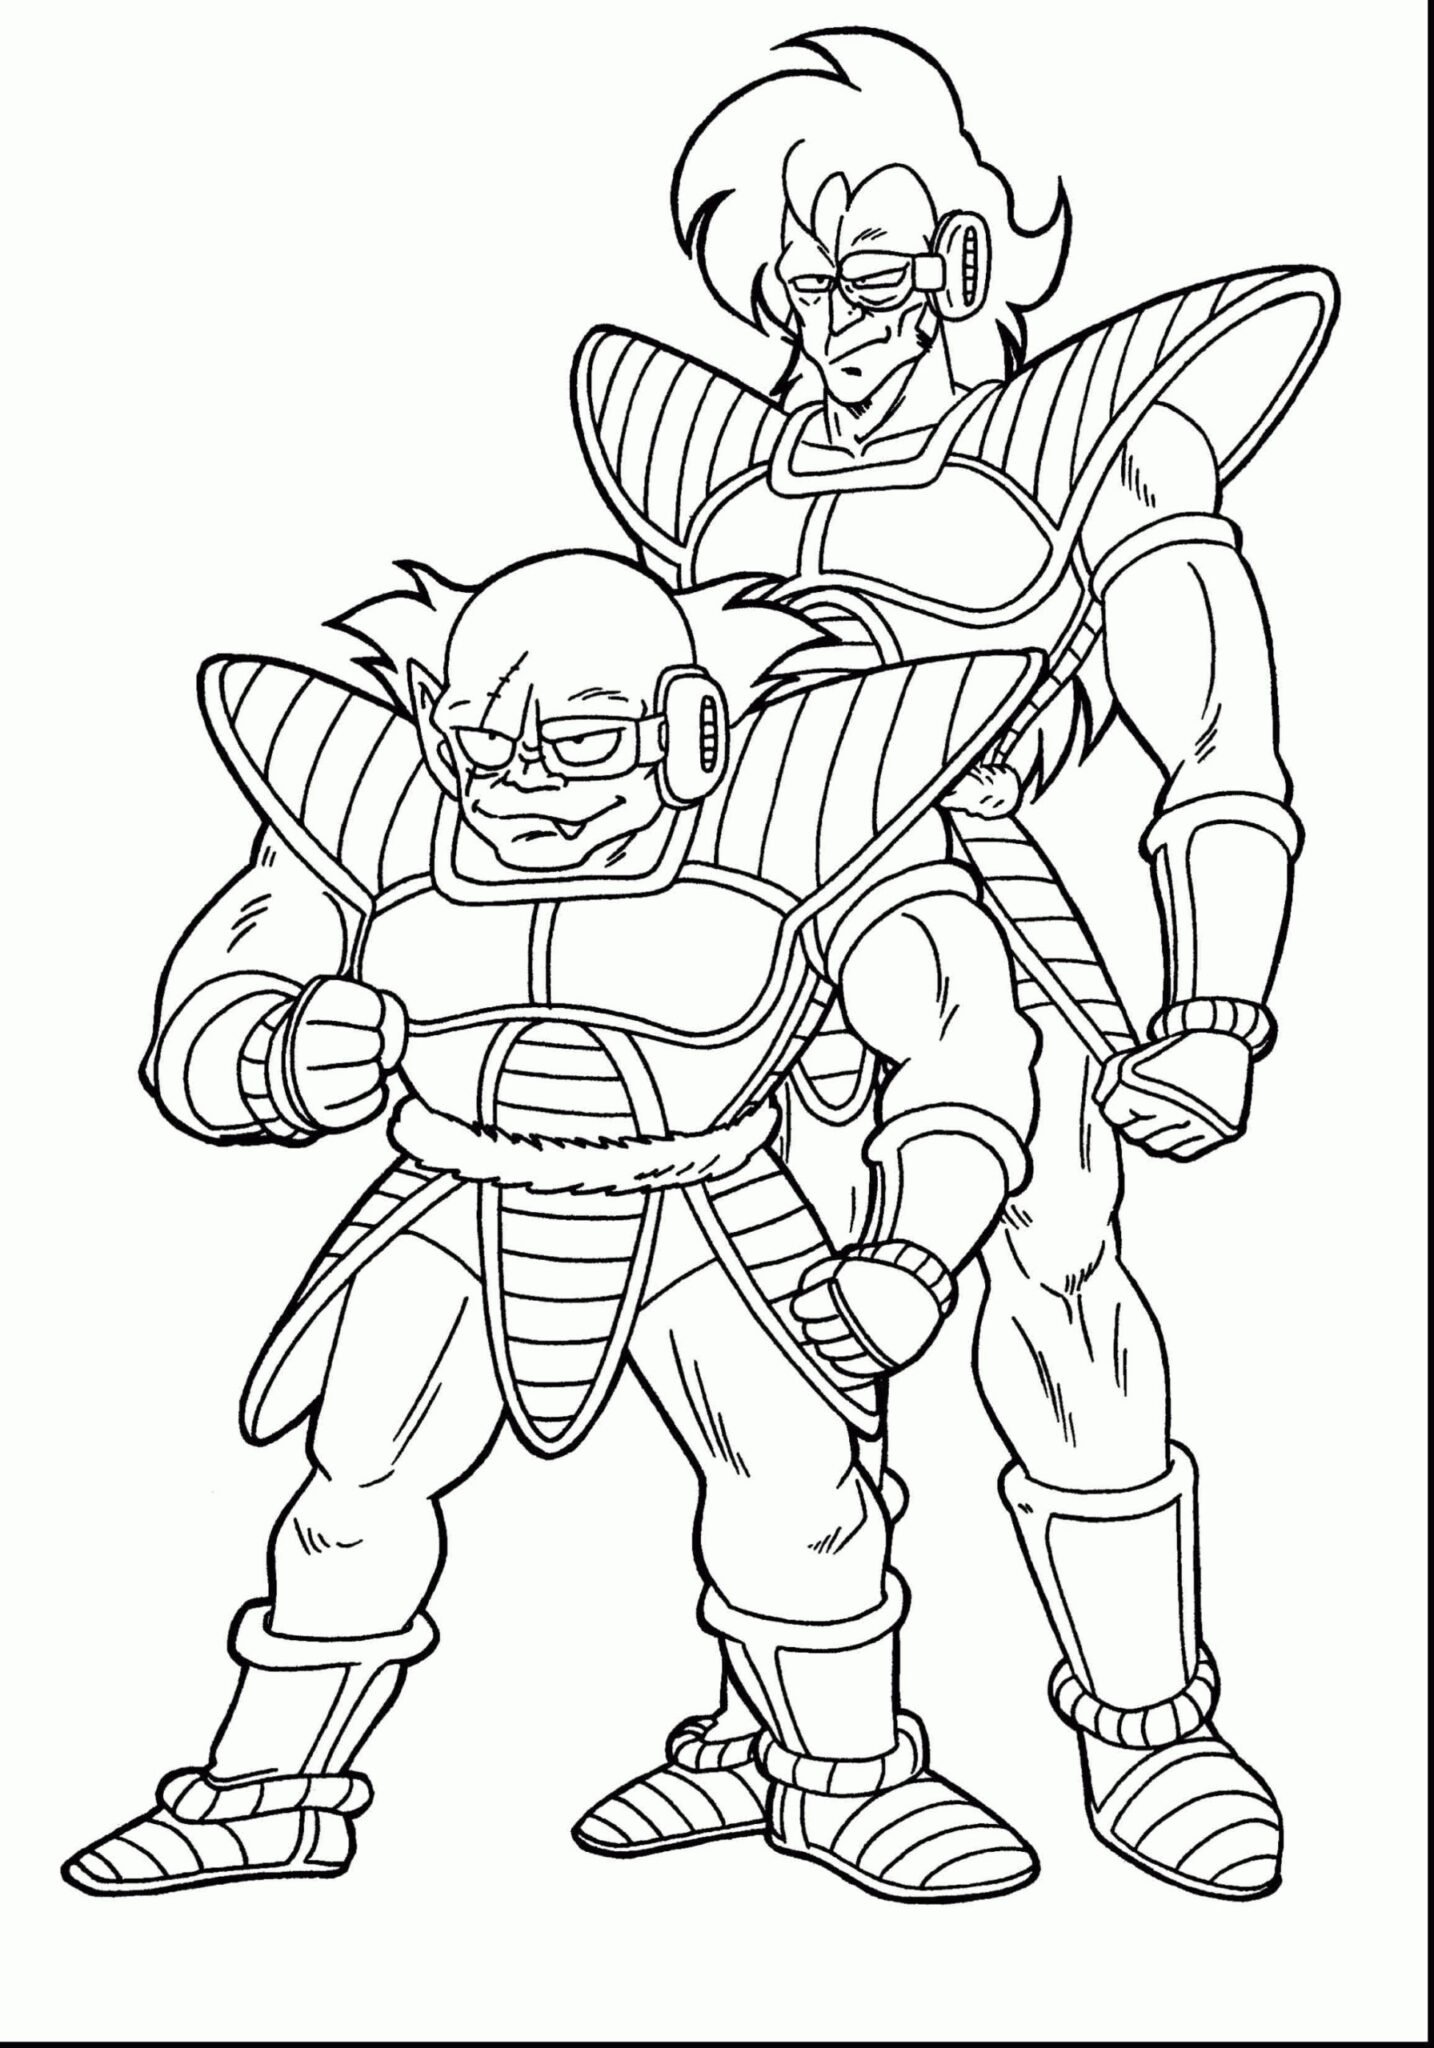 Ride the Wave of Adventure with Dragon Ball Z Coloring Pages Printable ...